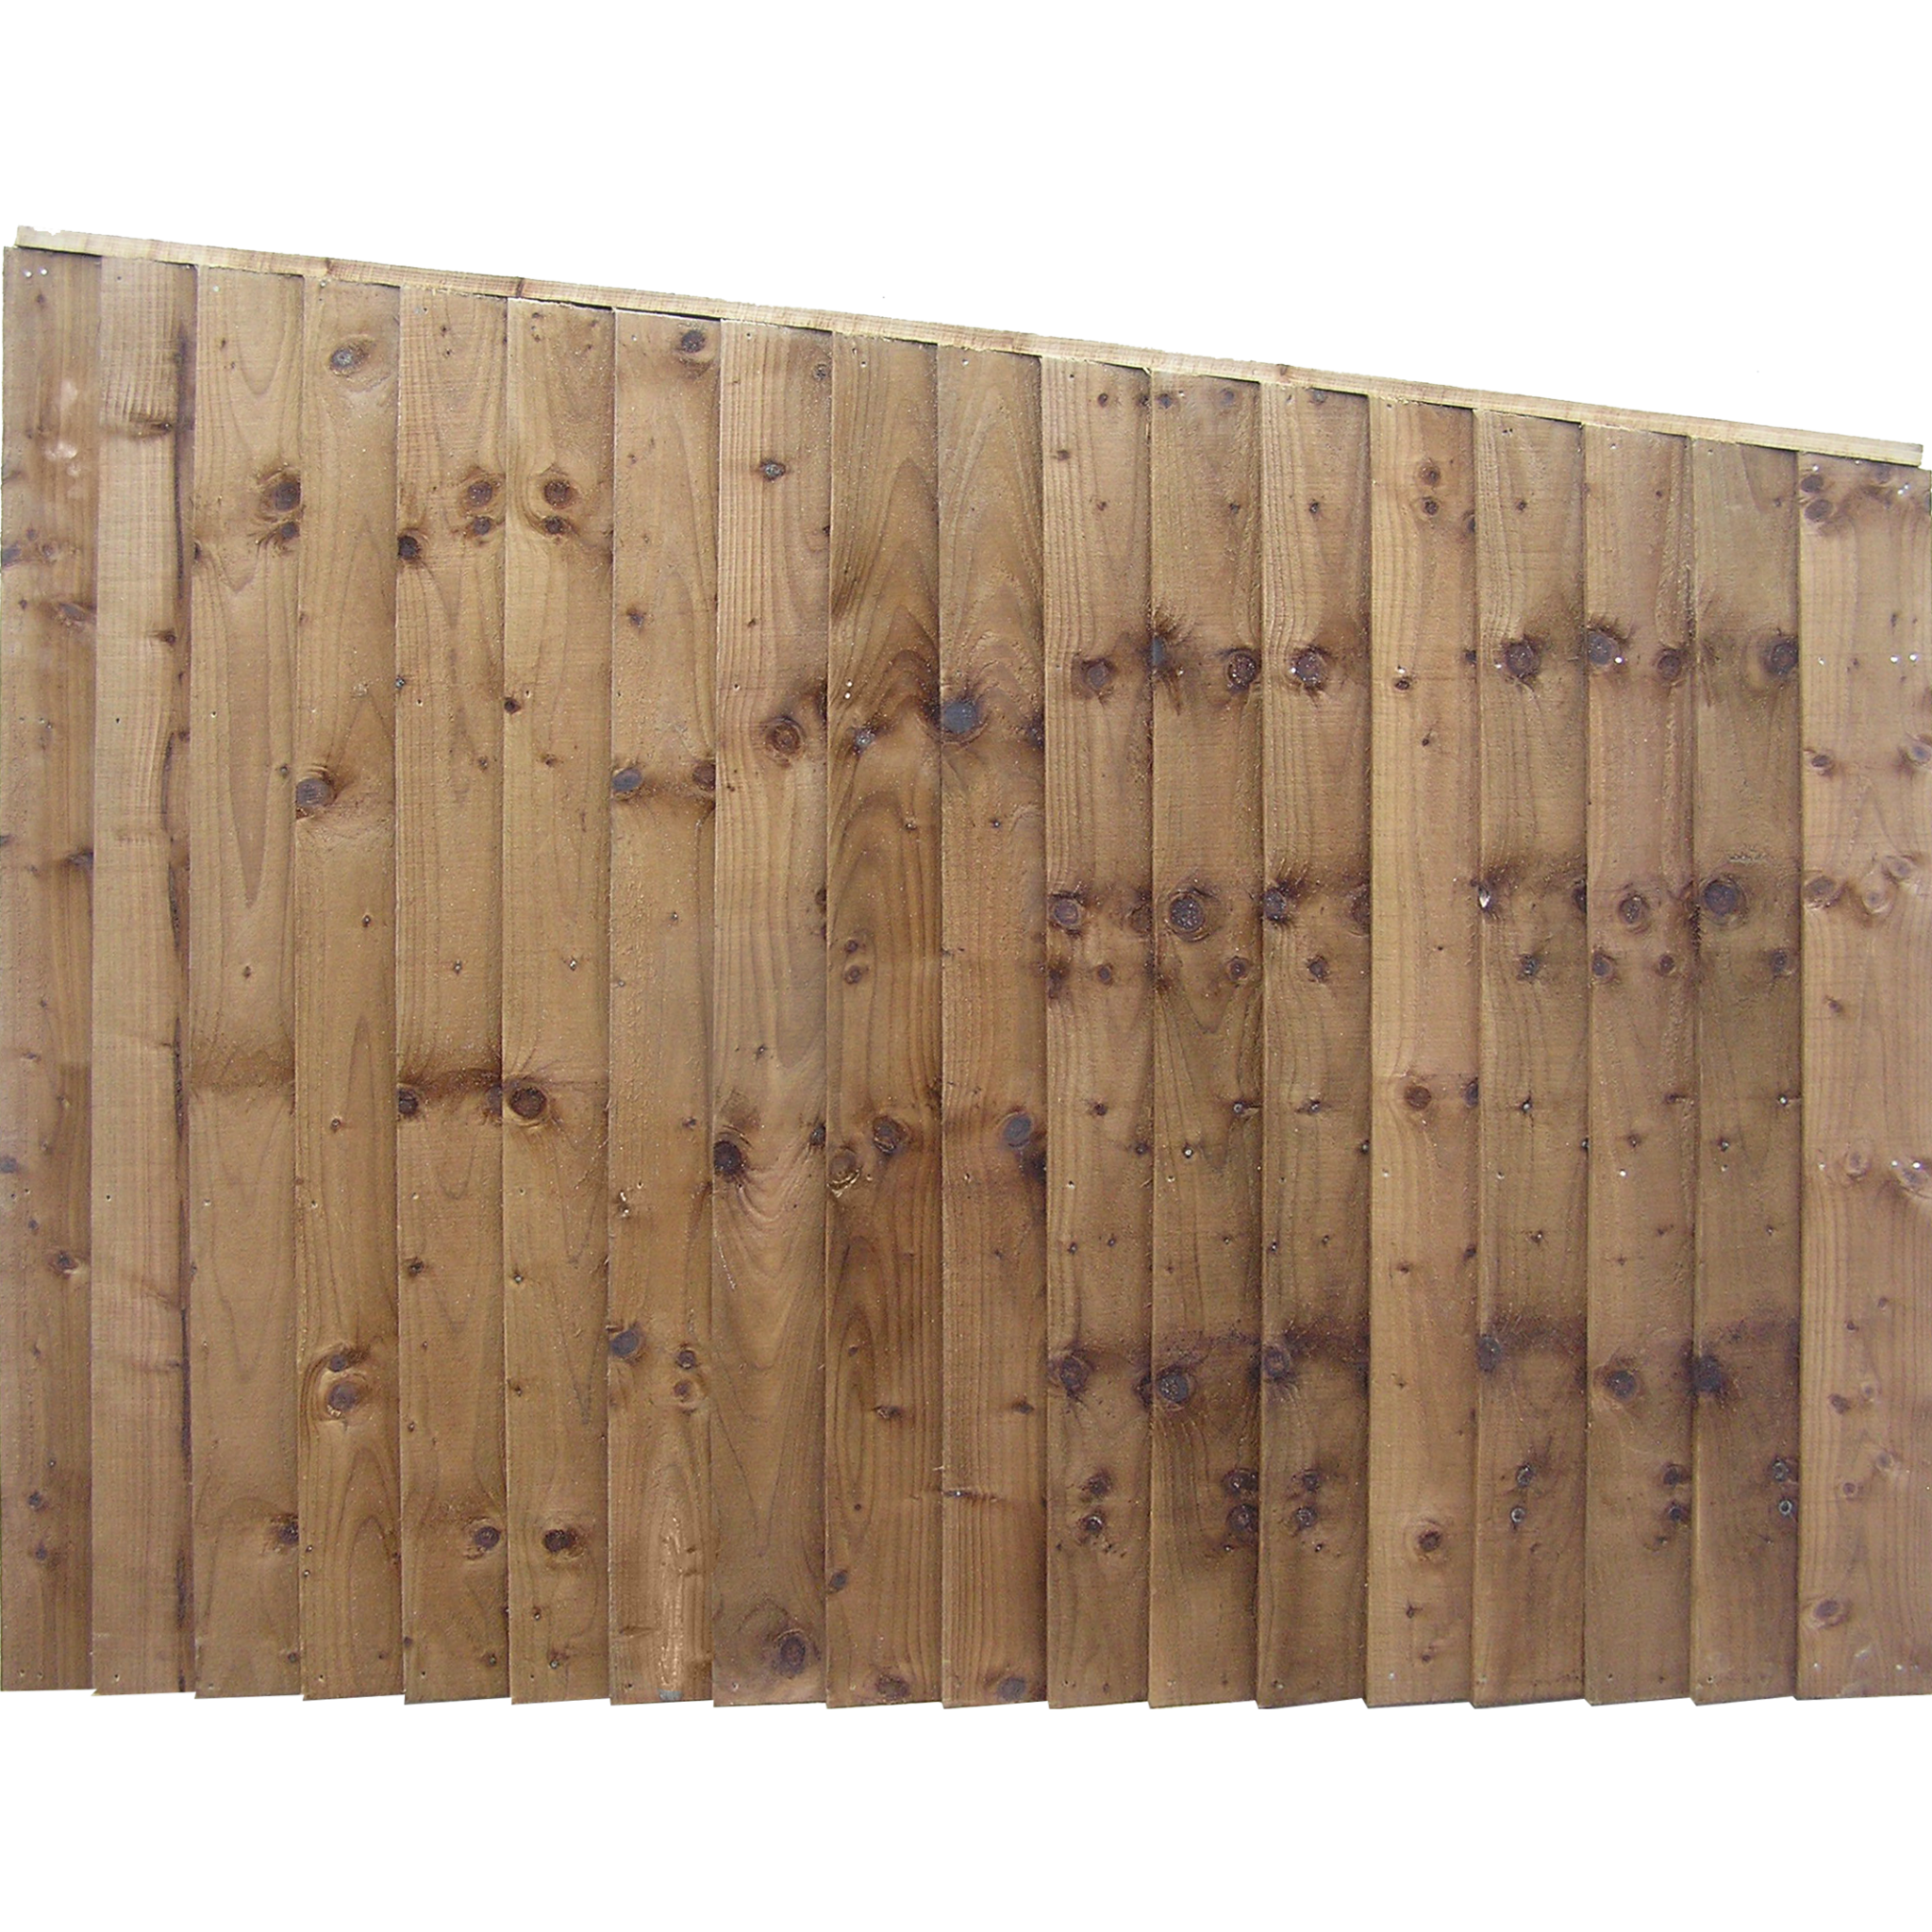 6ft Brown Feather Edge Closeboard Panels - Transitional